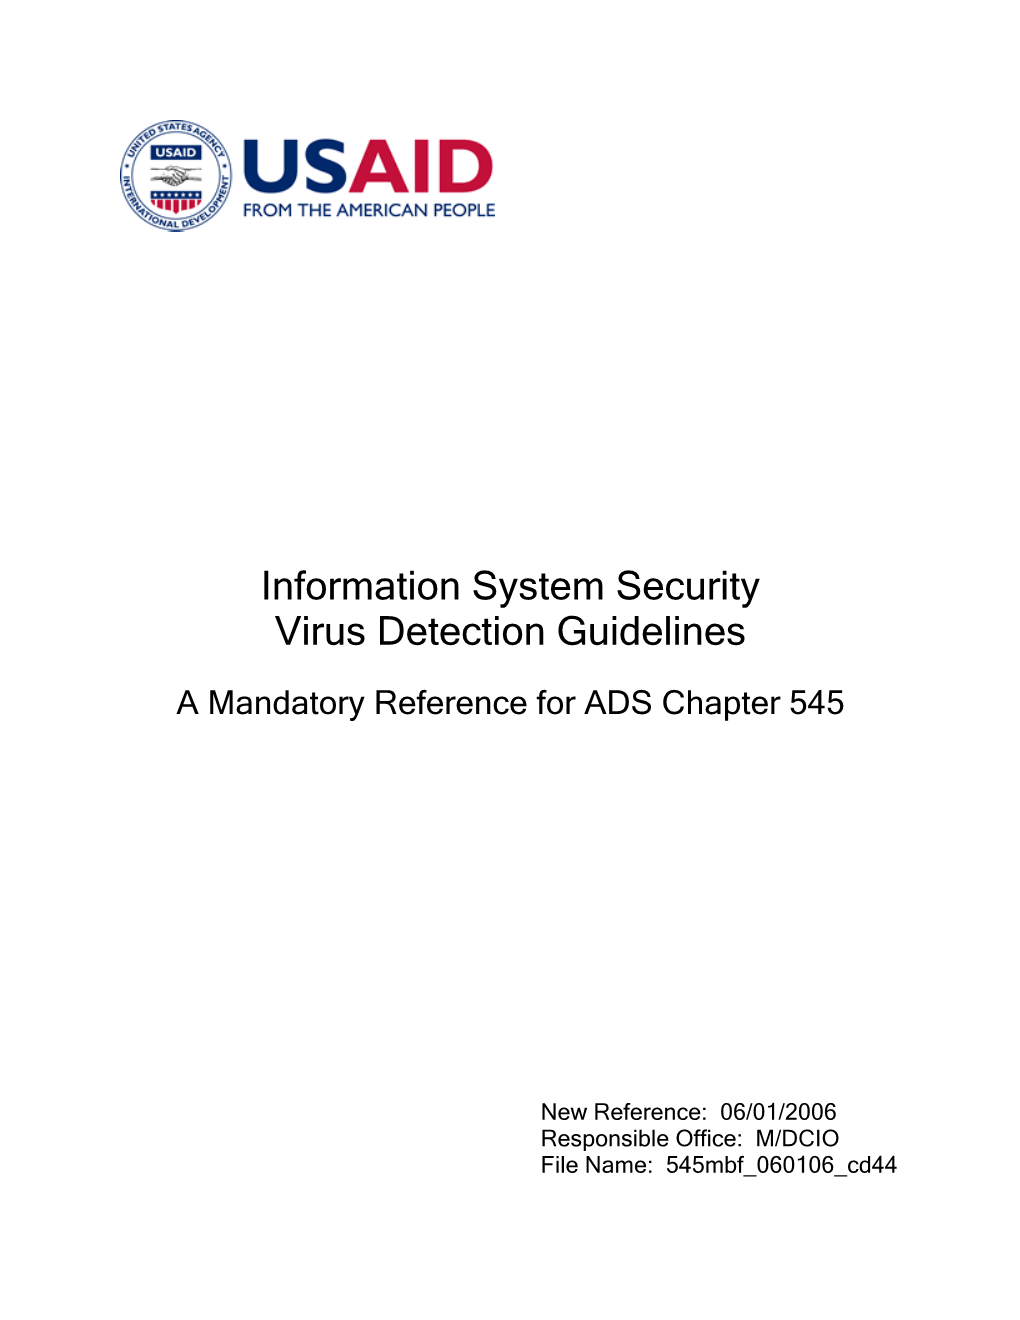 ADS 545Mbf, Information System Security Virus Detection Guidelines